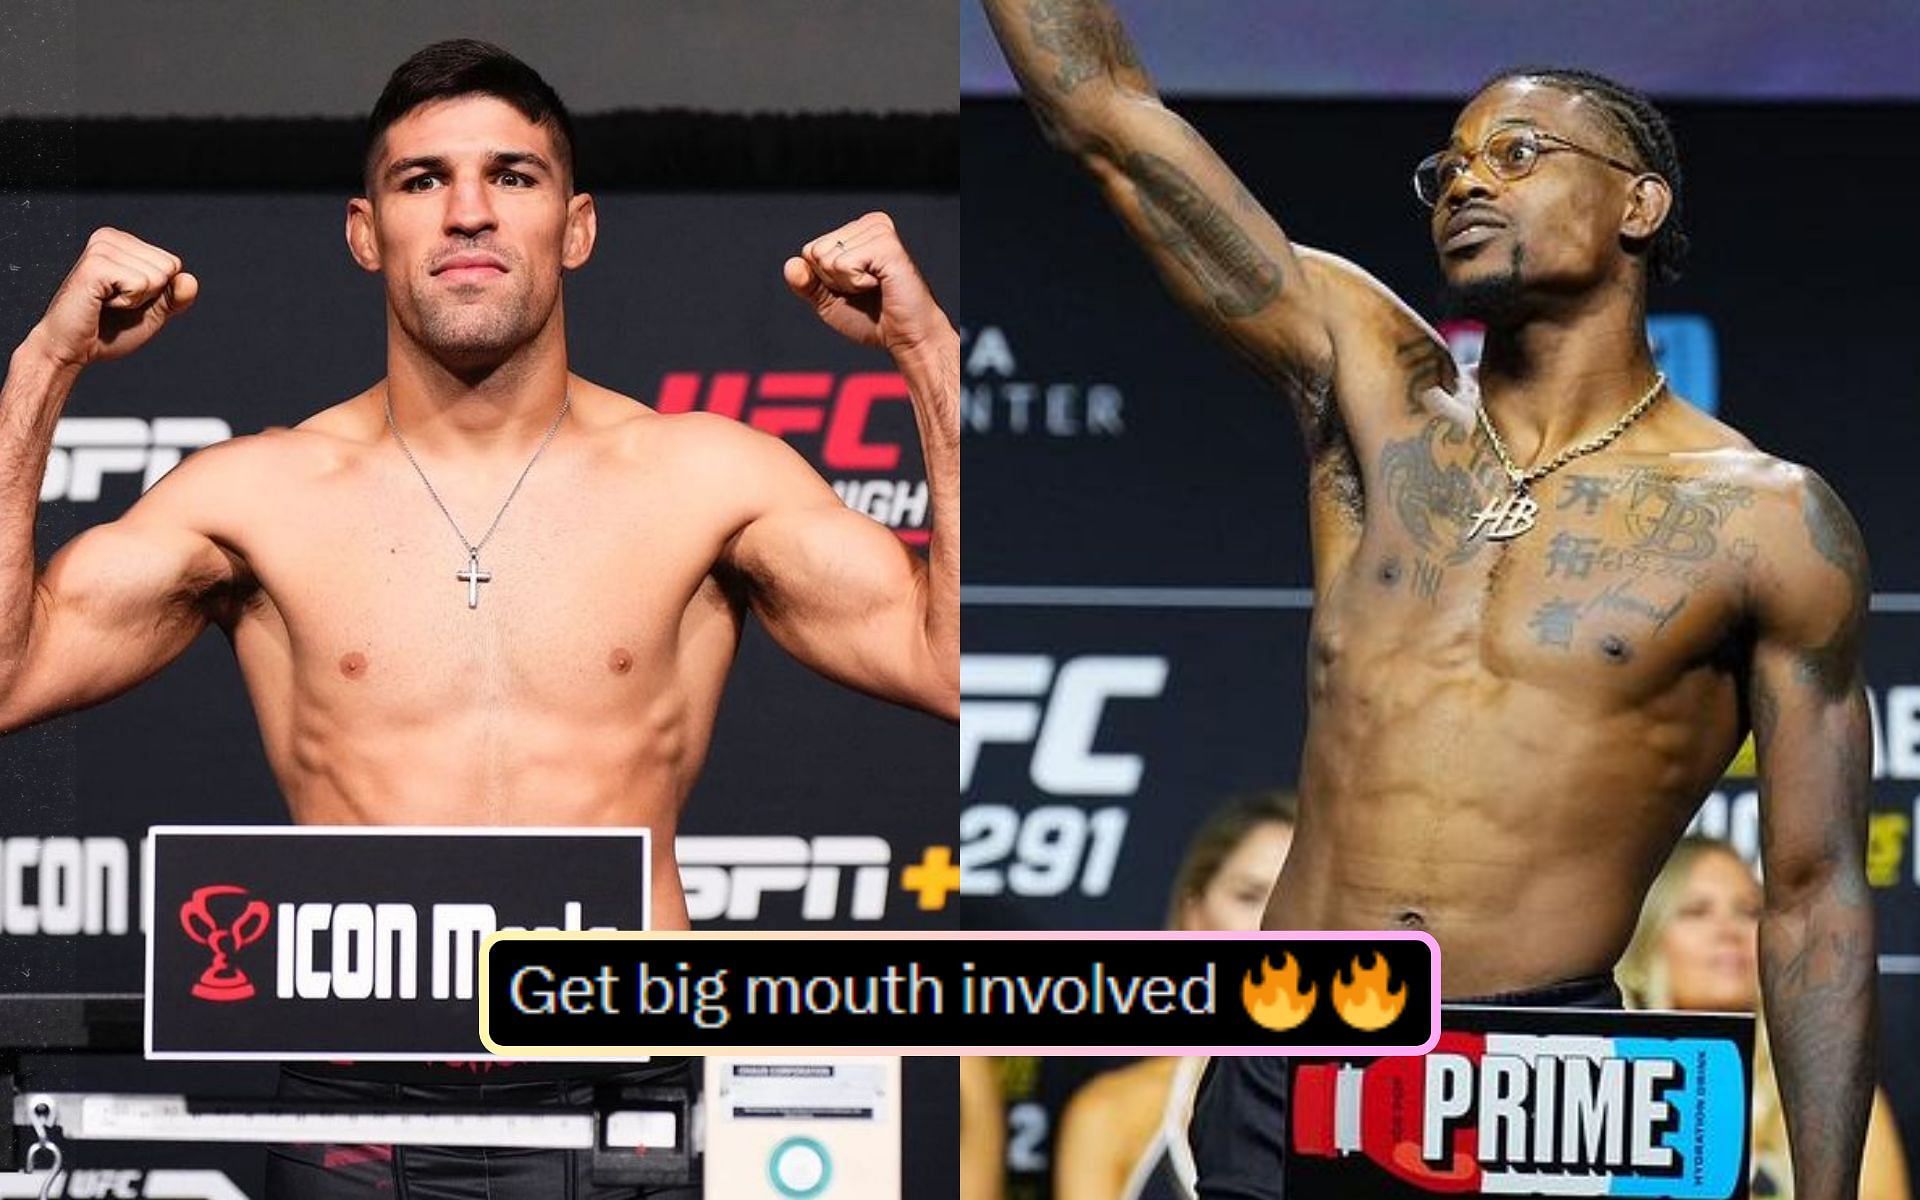 Vicente Luque and Kevin Holland verbally interested in fighting each other at UFC 296